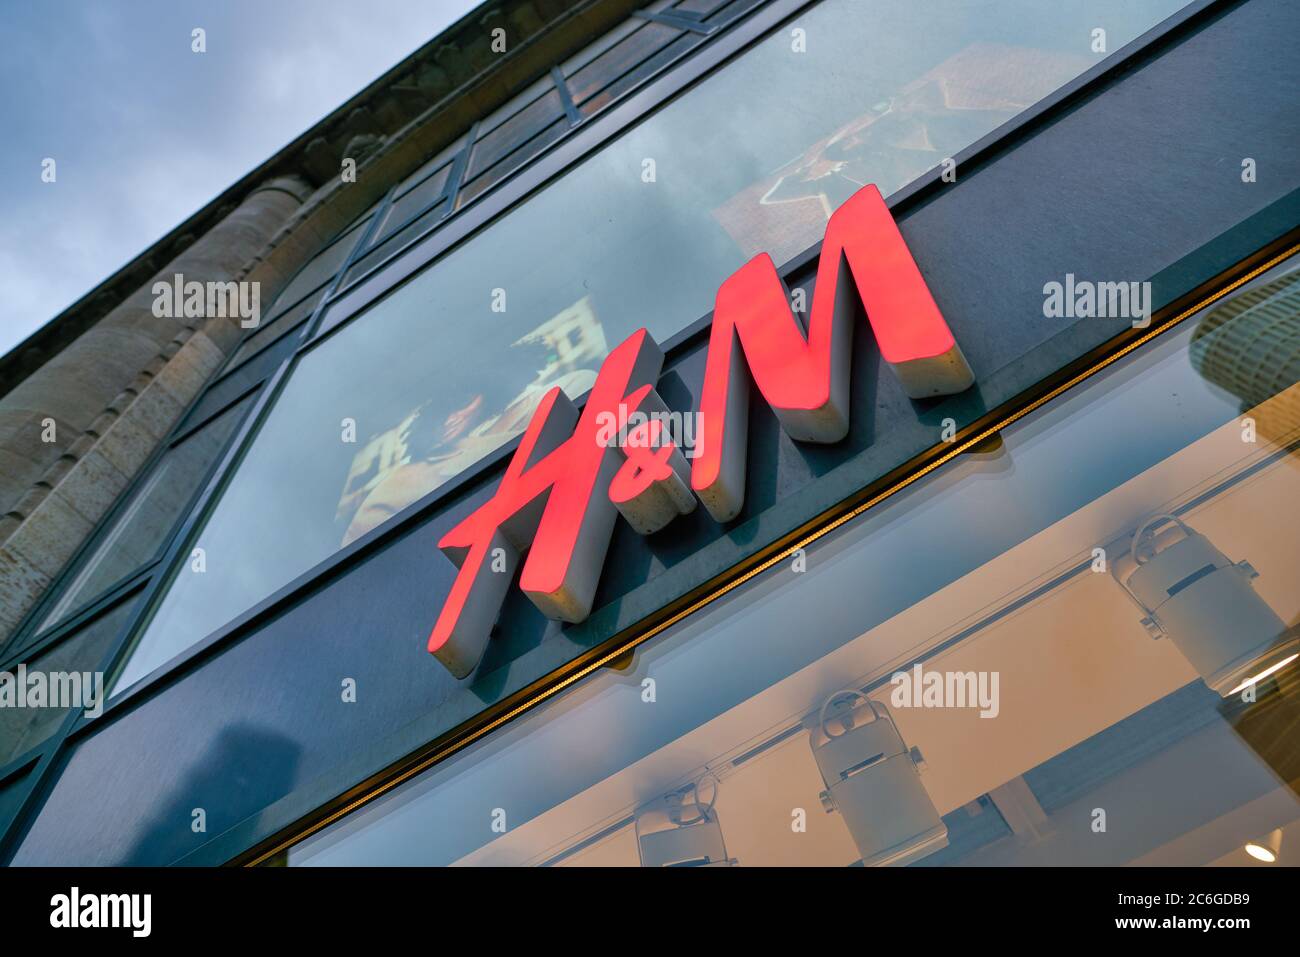 BERLIN, GERMANY - CIRCA SEPTEMBER, 2019: close up shot of H & M storefront as seen from a street in Berlin. Stock Photo